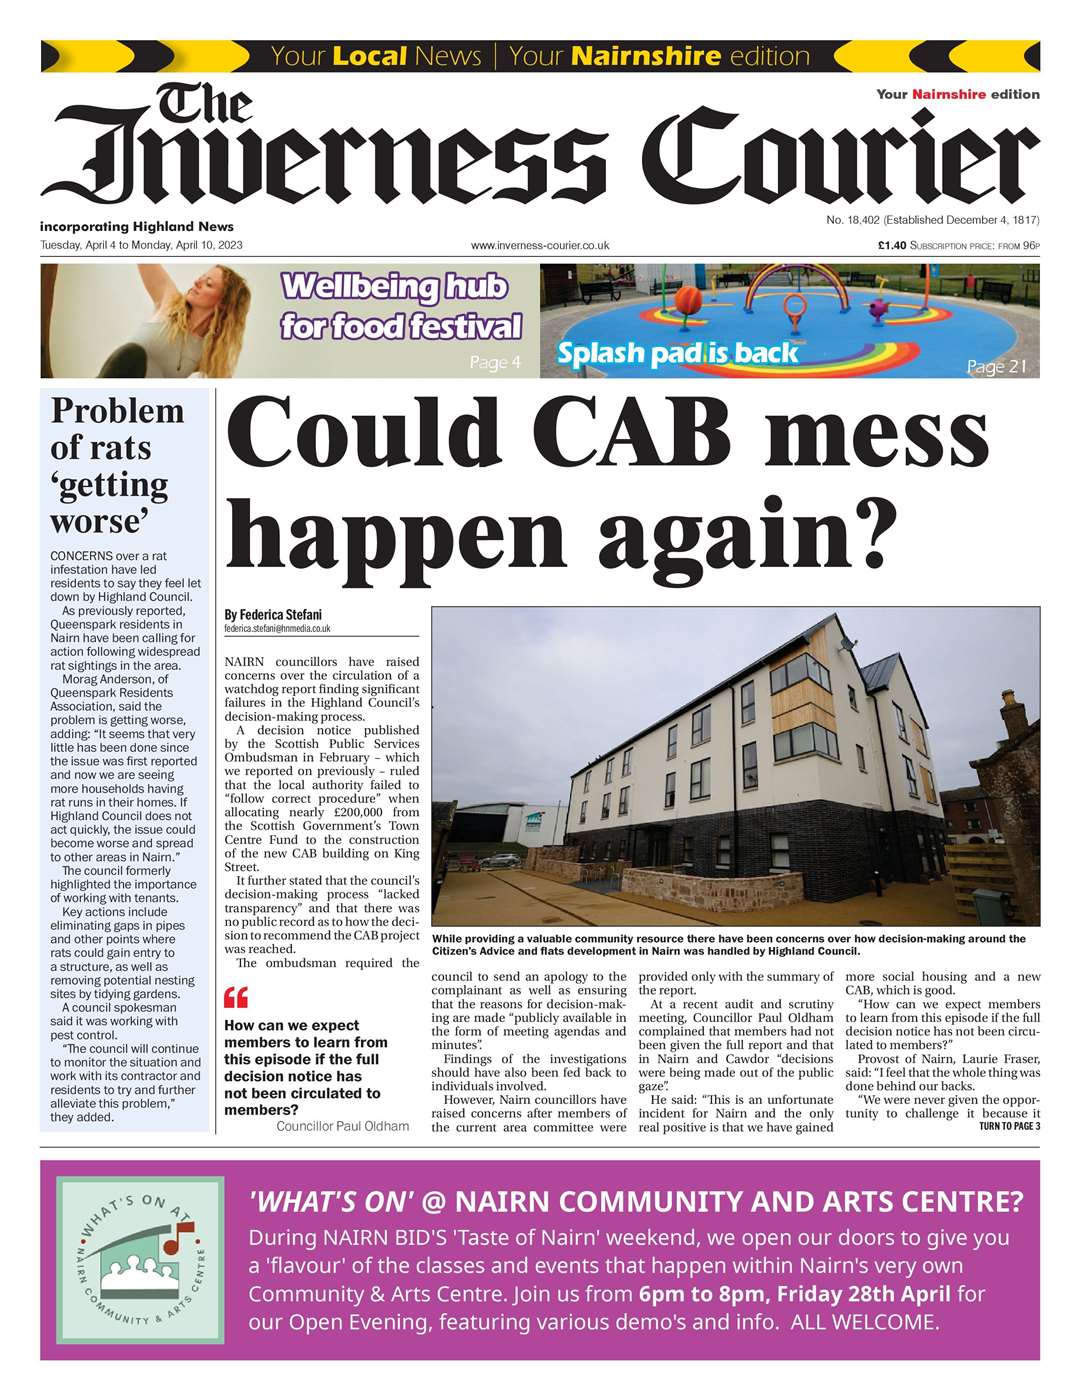 The Inverness Courier (Nairnshire edition), April 4, front page.